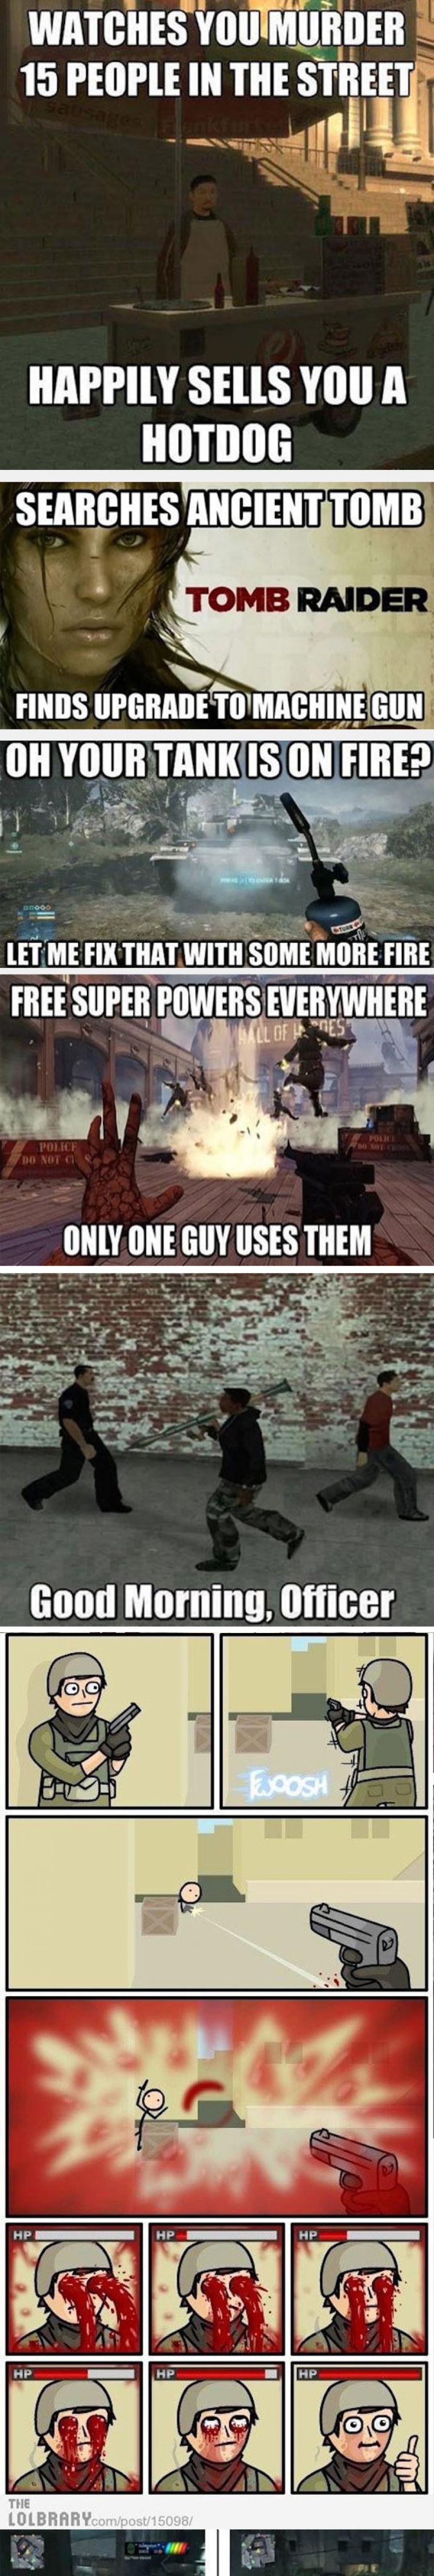 Video Games And Their Logic